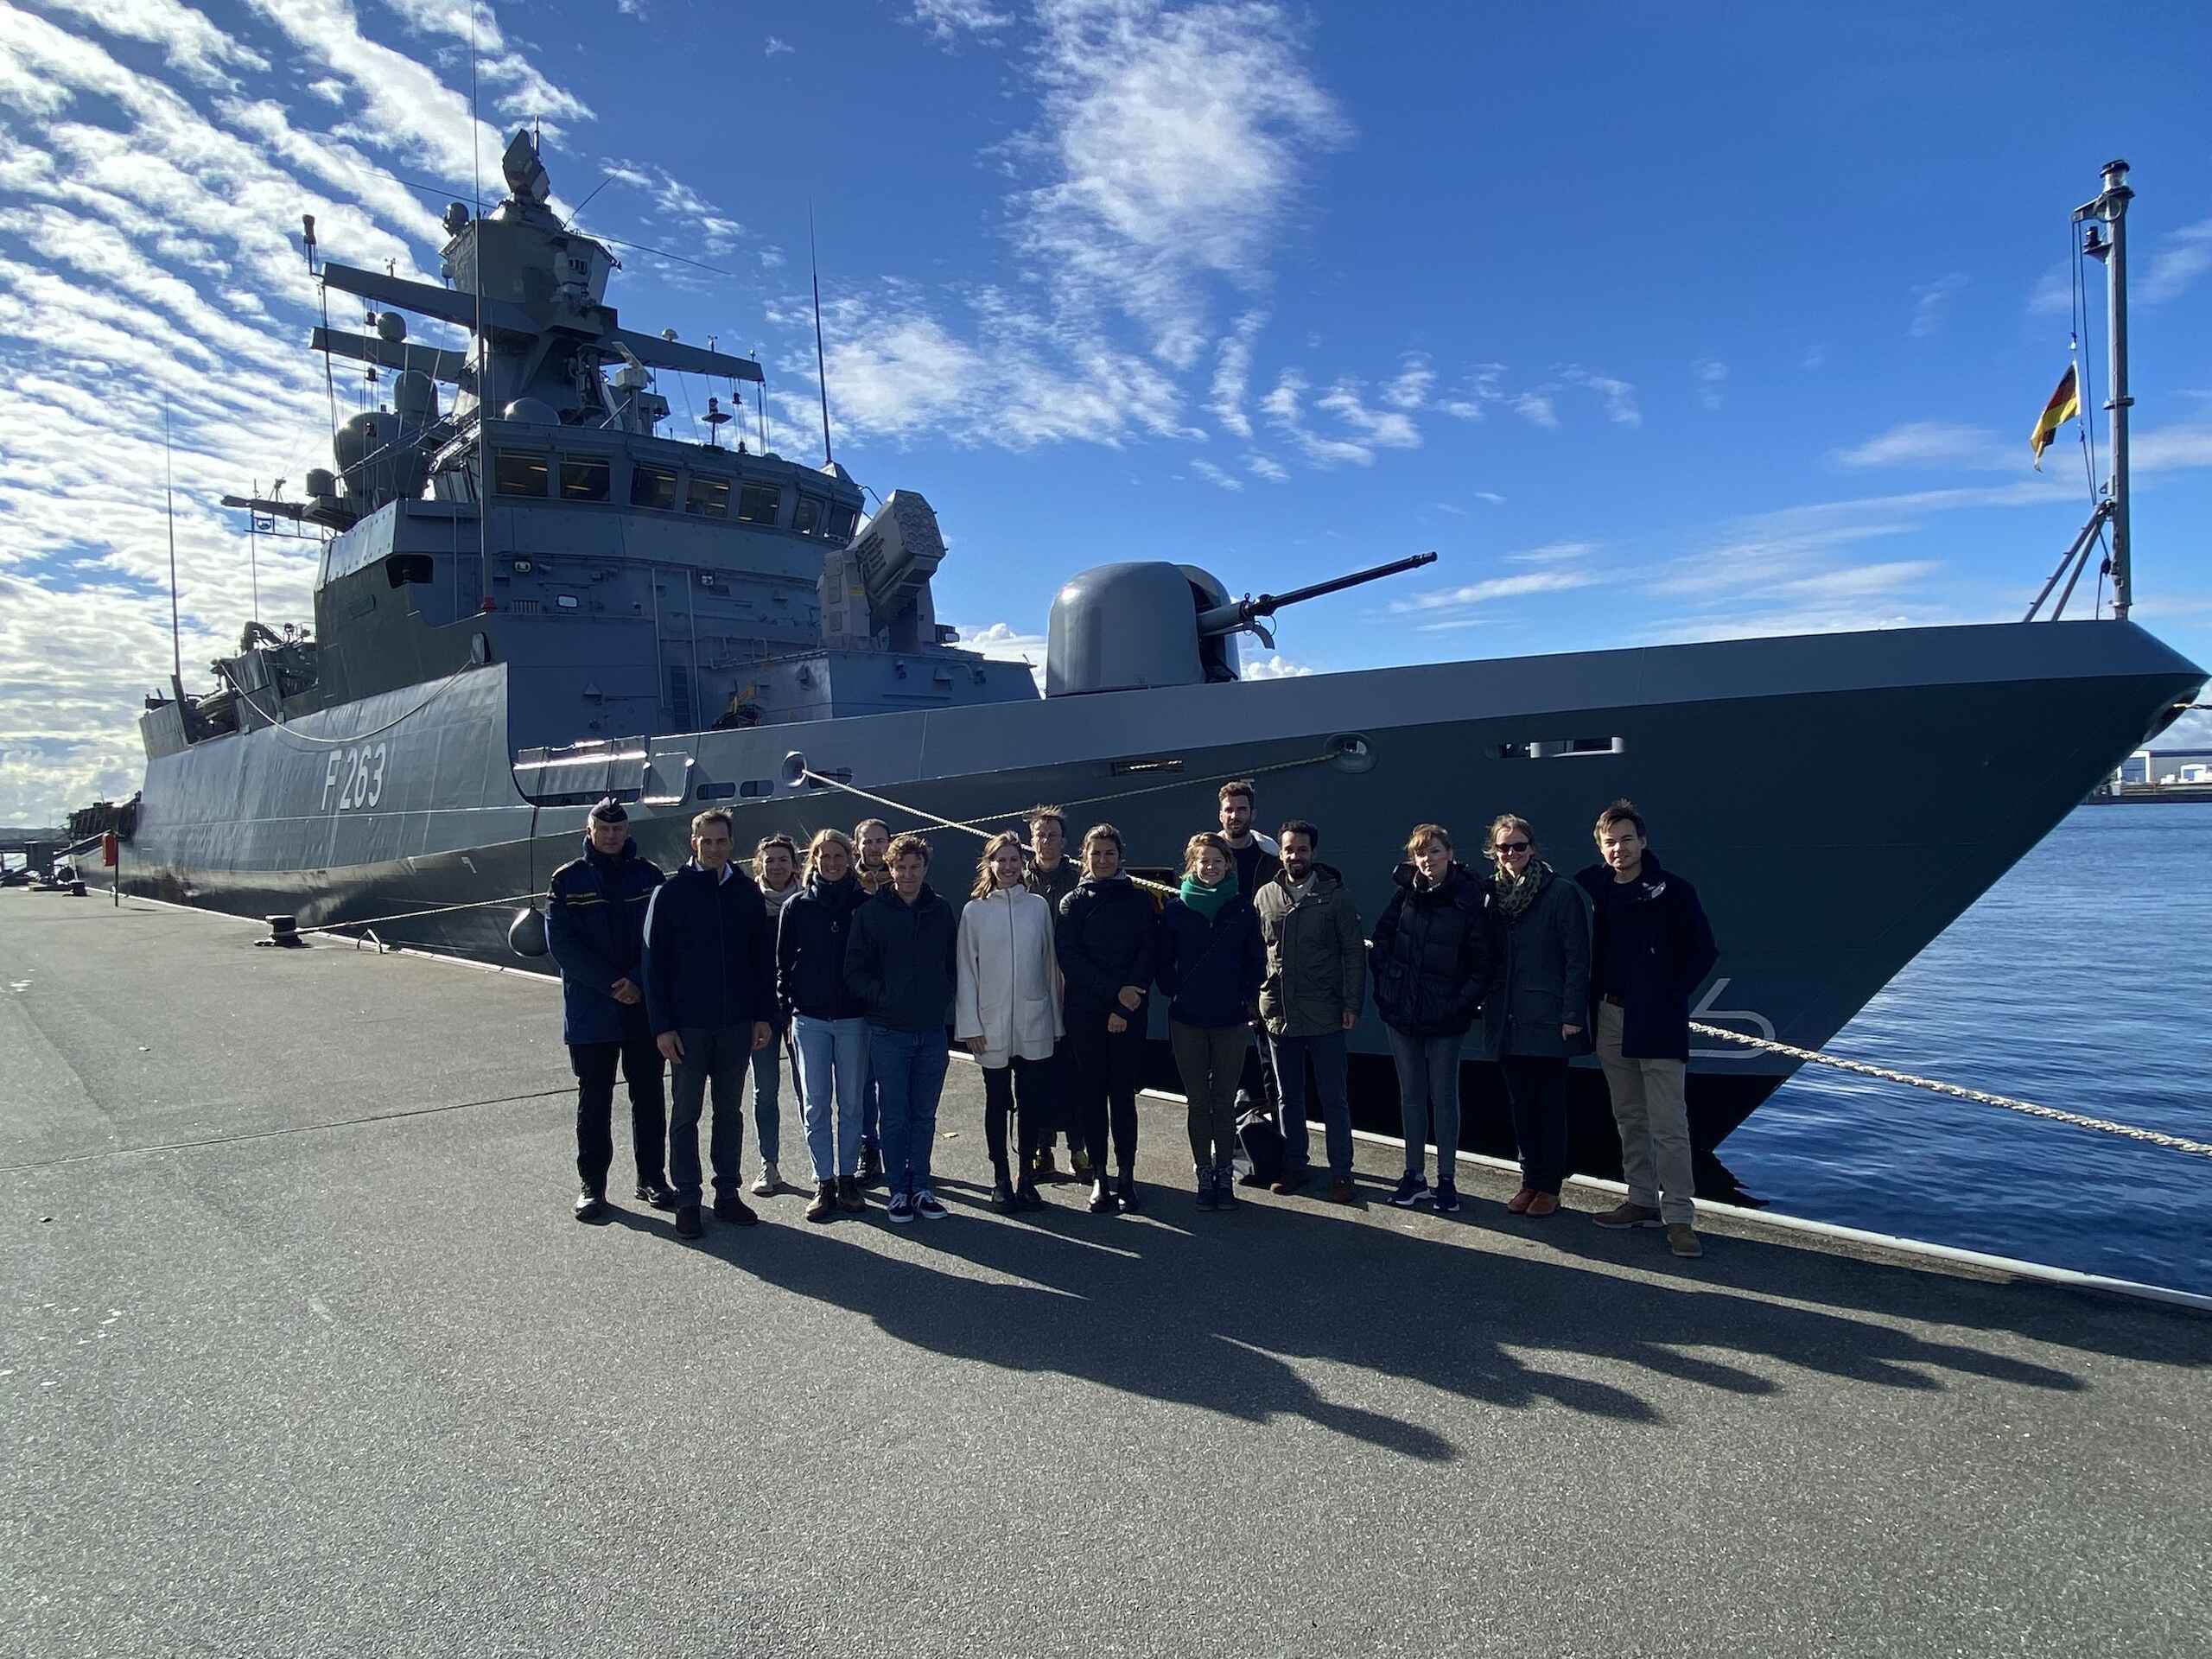 Körber Network Foreign Policy in front of the corvette Oldenburg